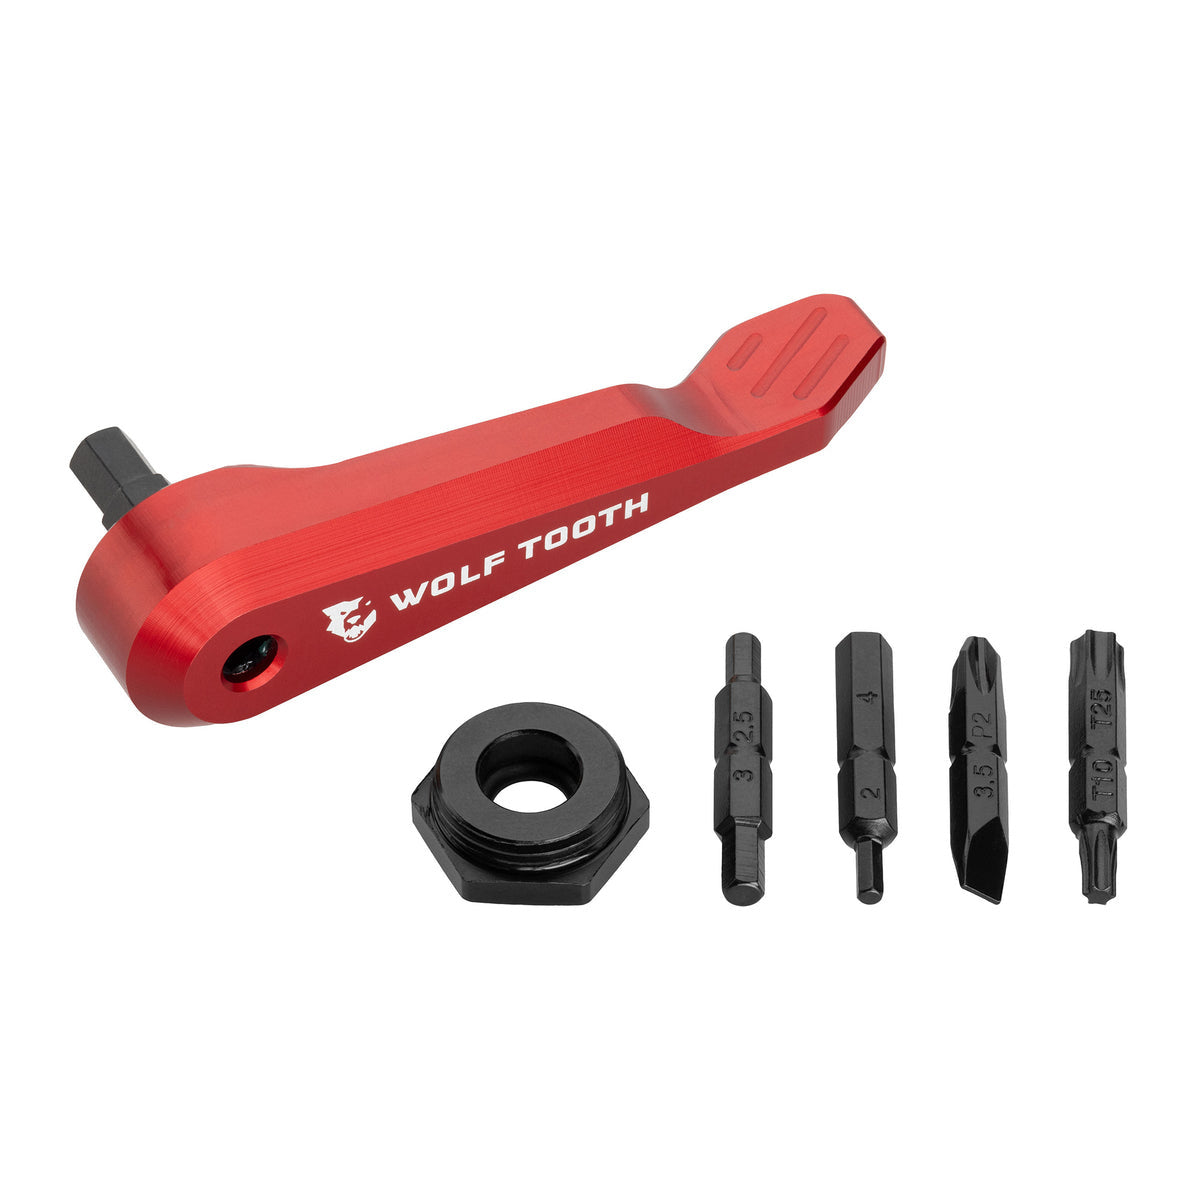 Axle Handle Multi-Tool - Wolf Tooth Components